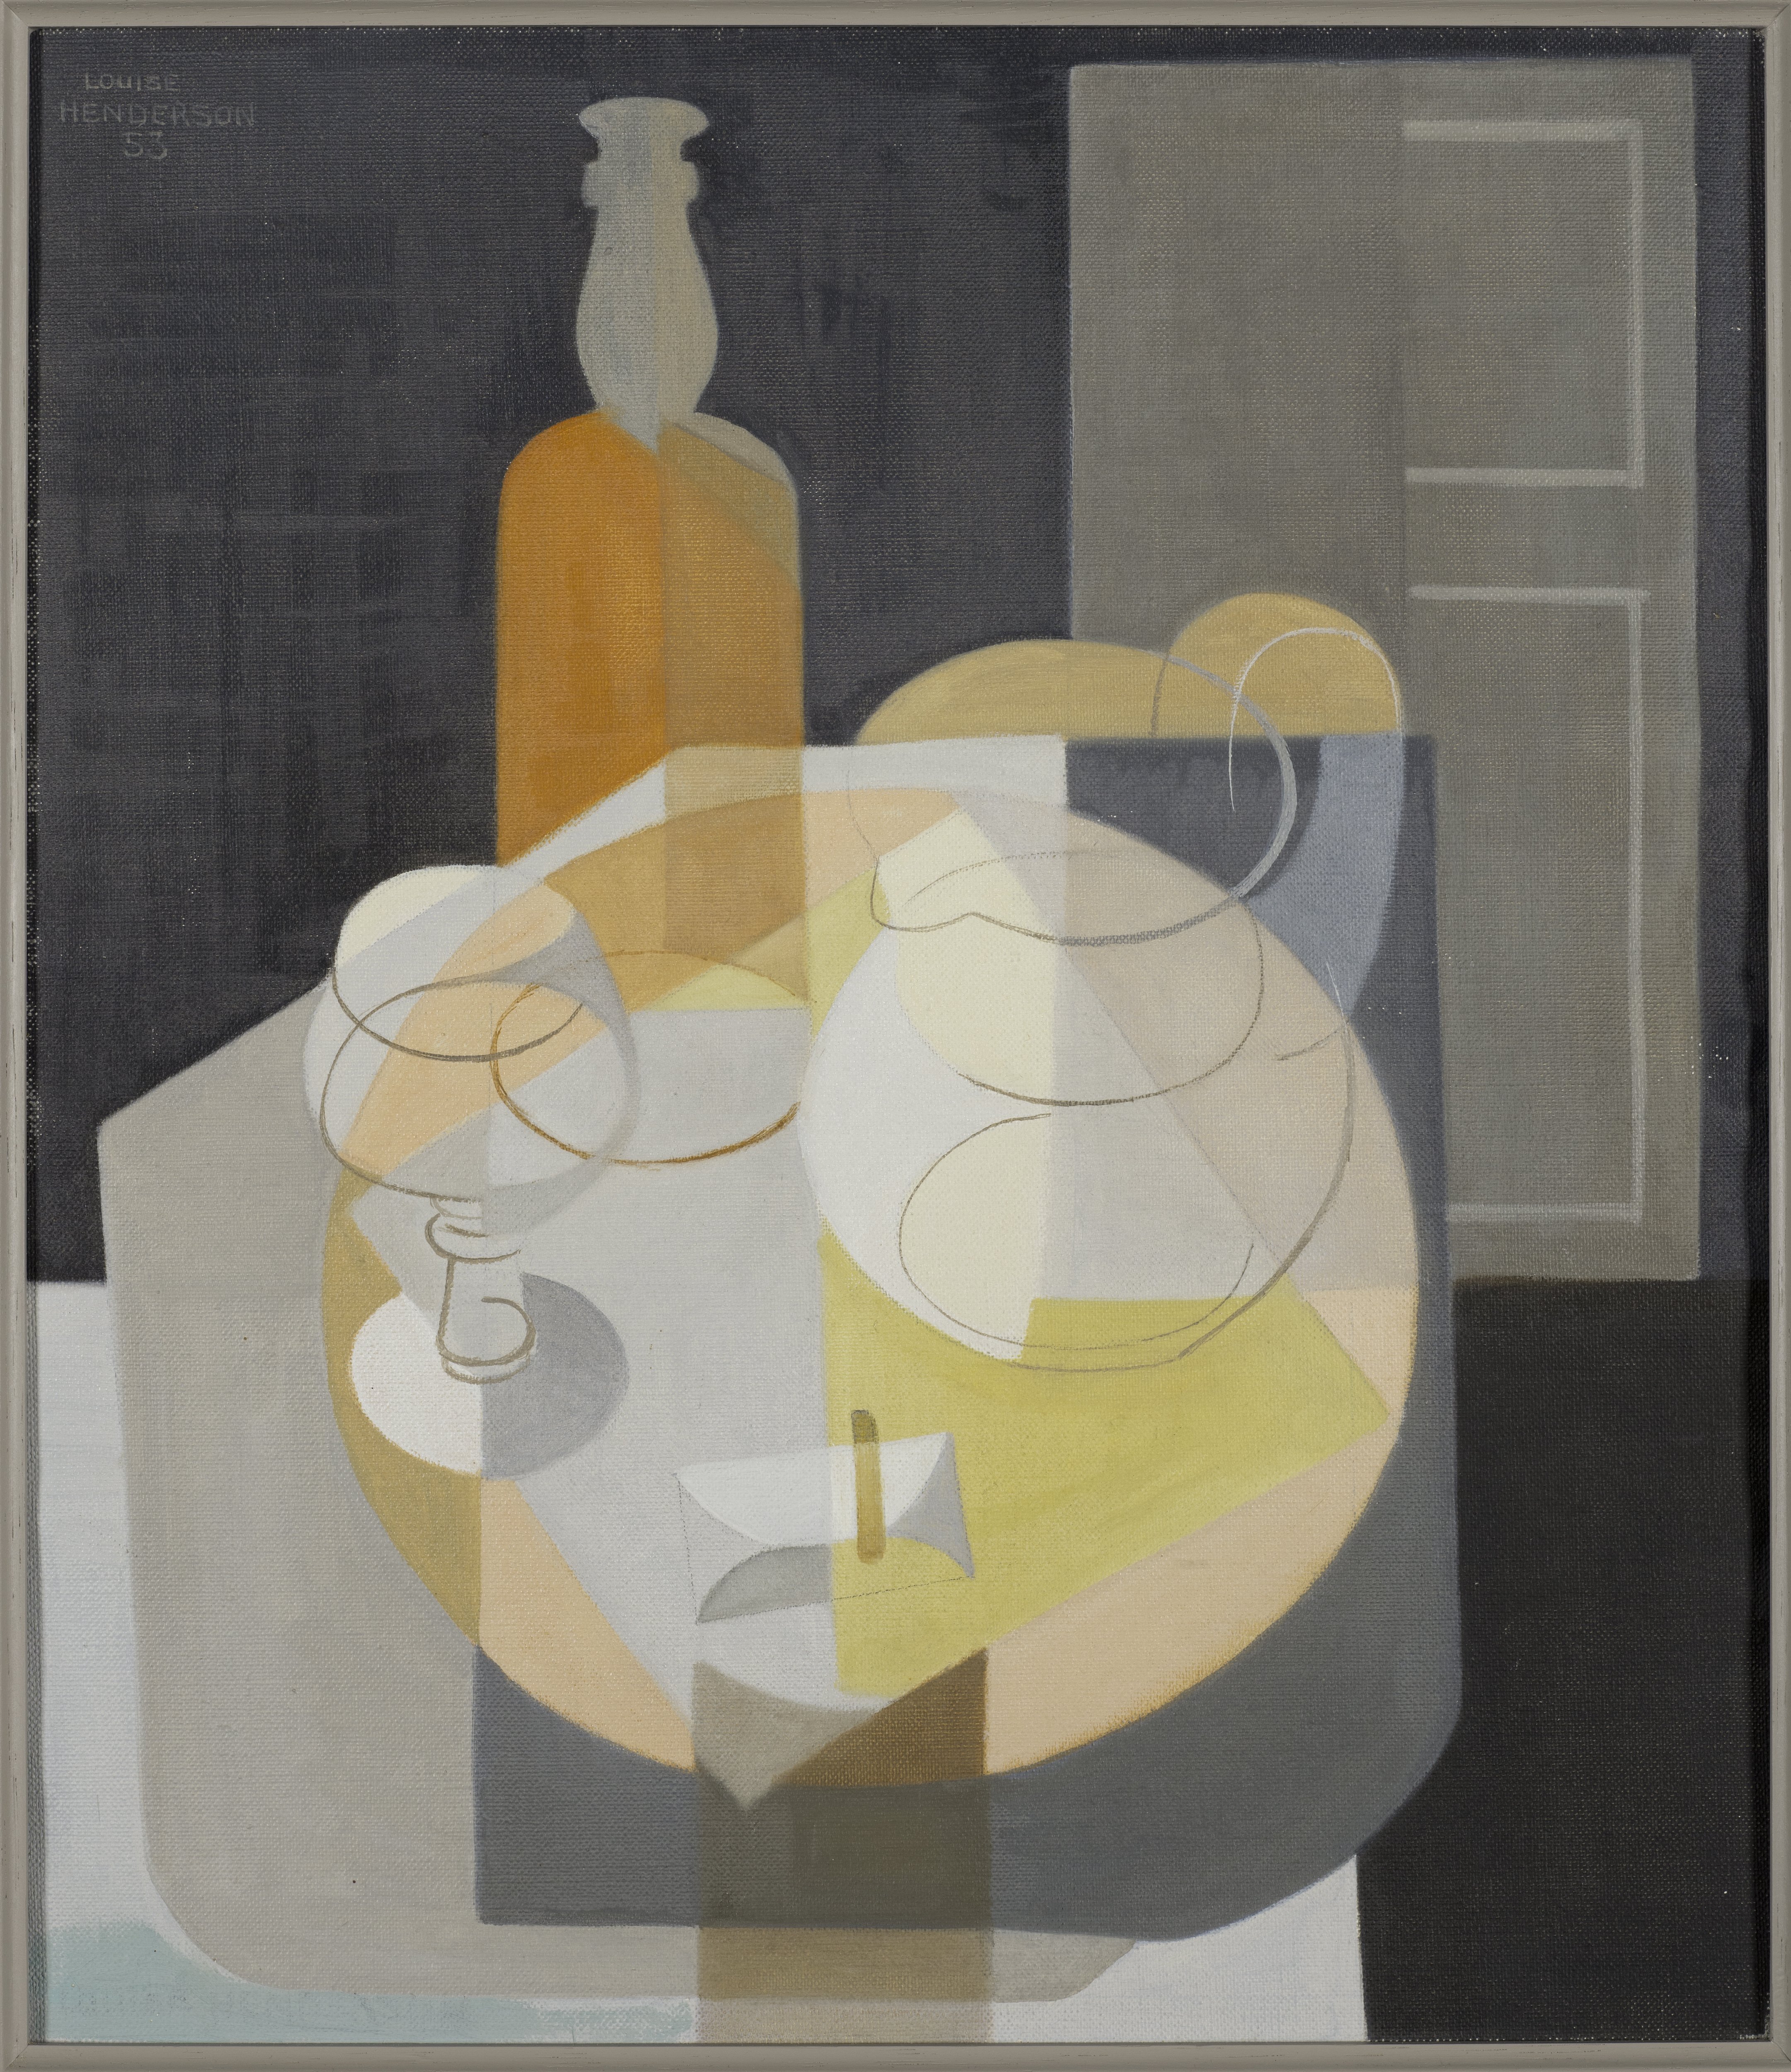 Still Life, 1958, by Louise Henderson (1902-1994). Photo: Hocken Pictorial Collections Uare Taoka...